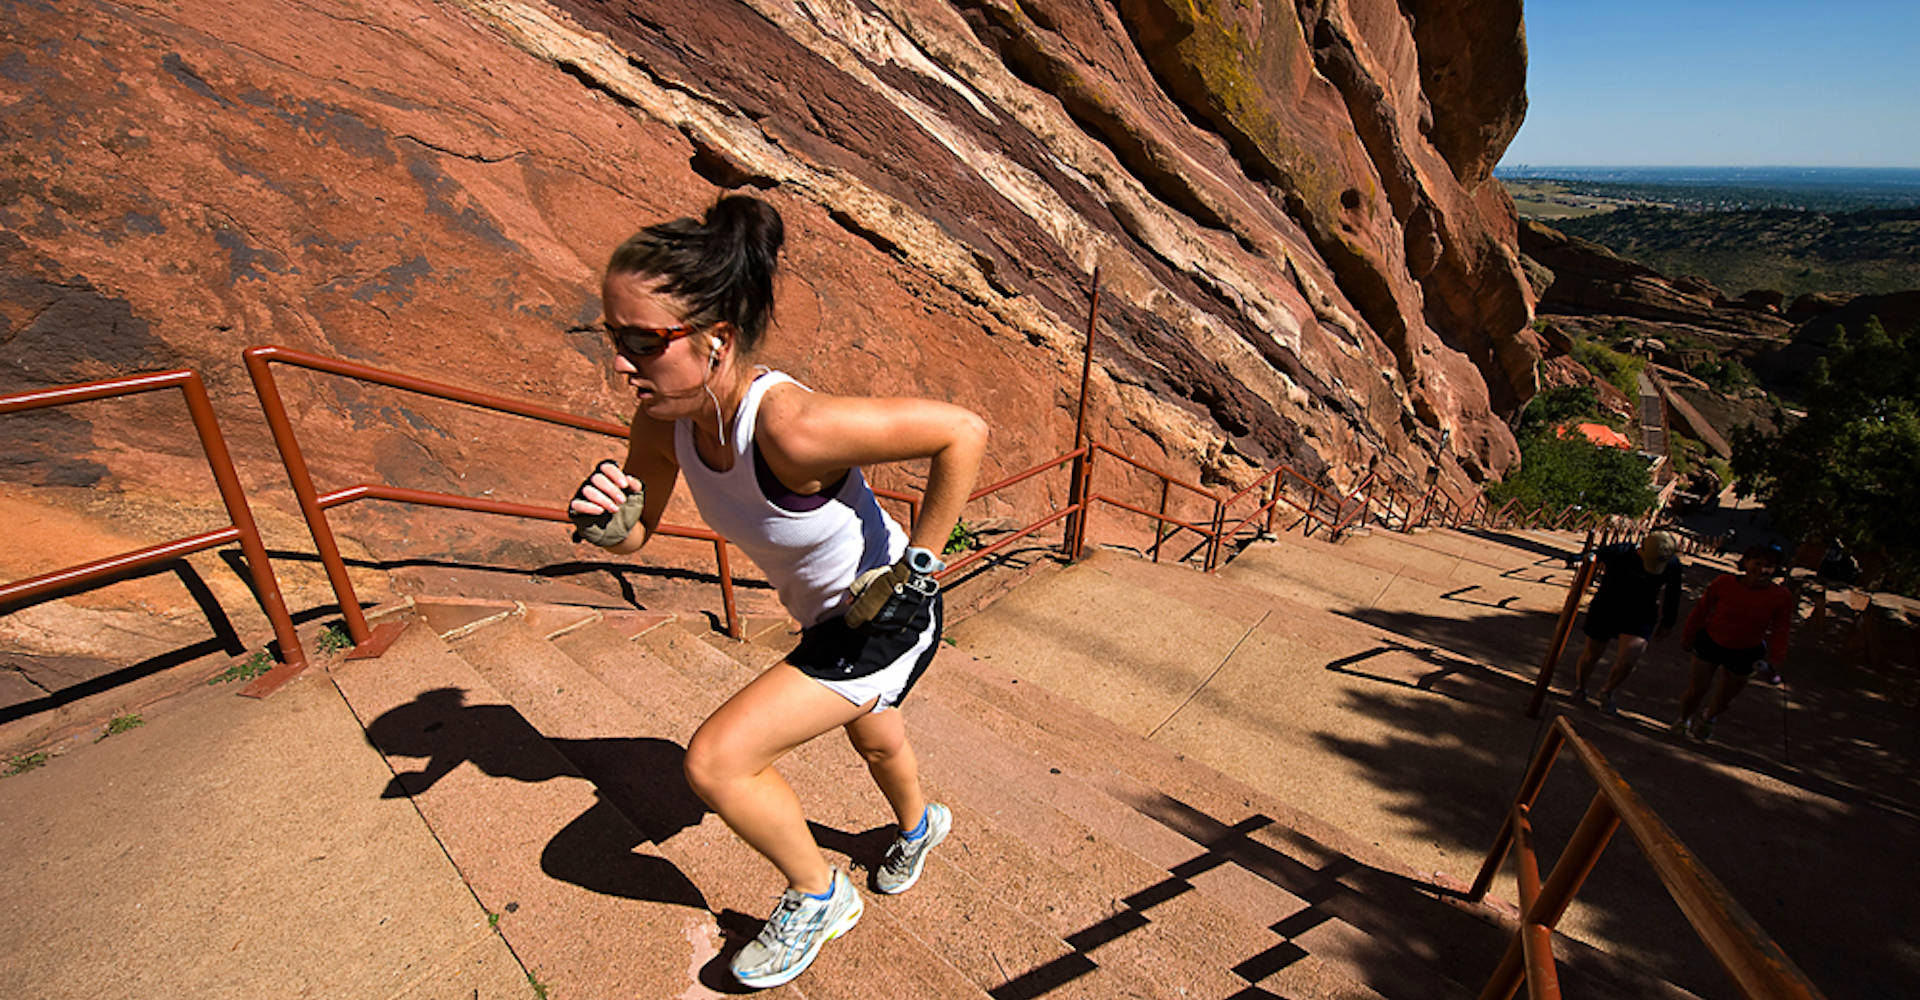 7 ways to get fit, Colorado style